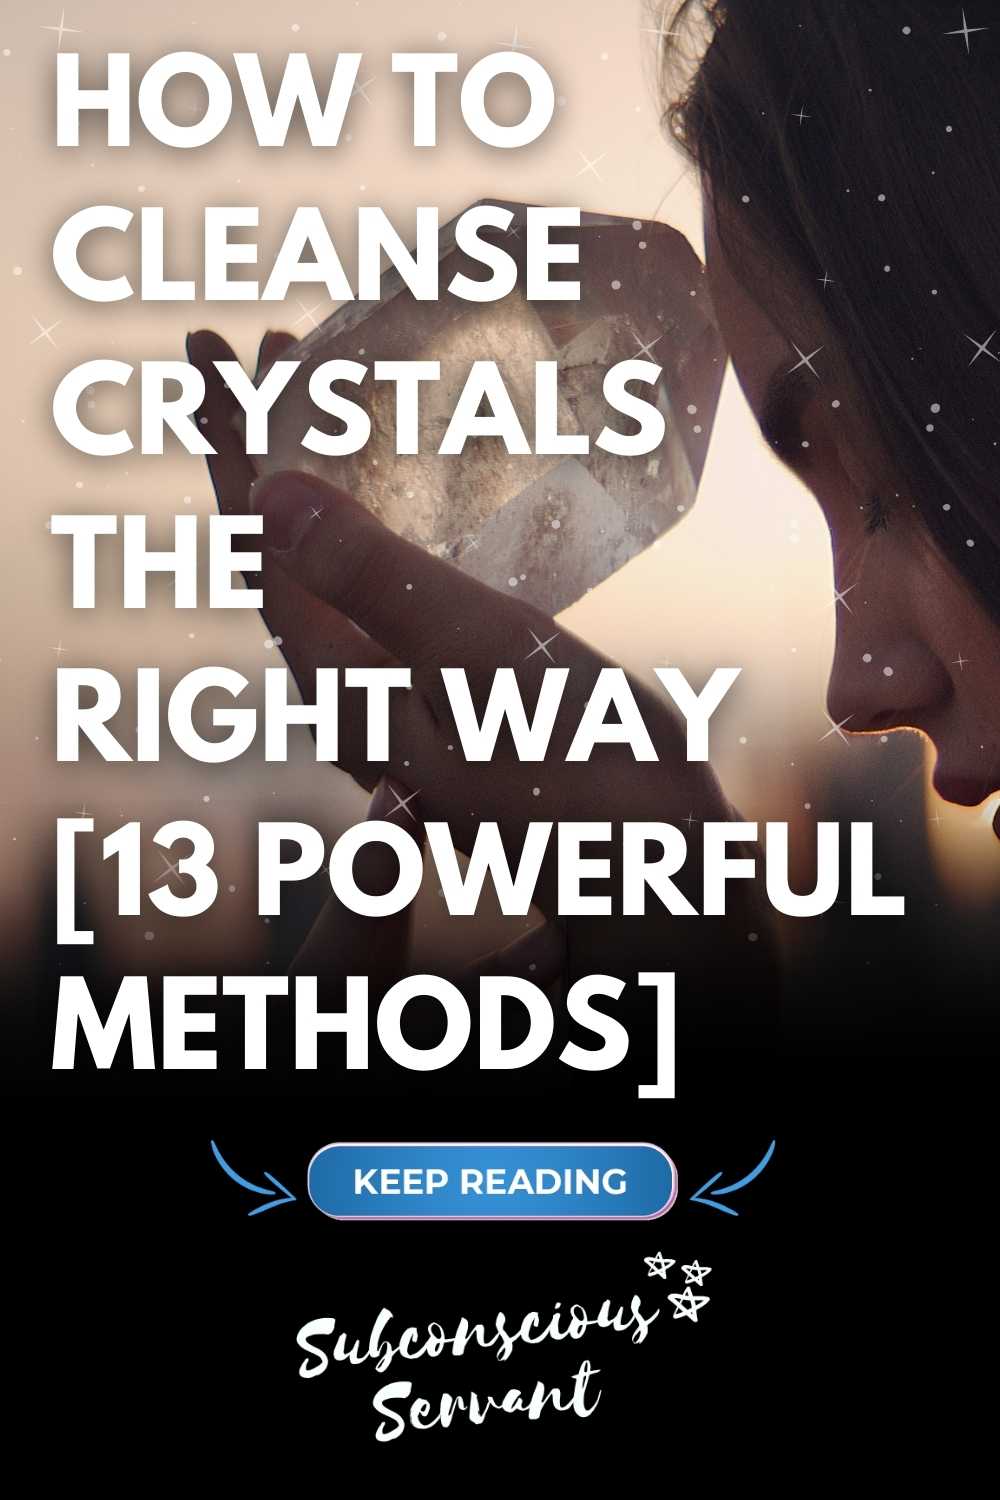 How To Cleanse Crystals The Right Way (13 Powerful Methods)